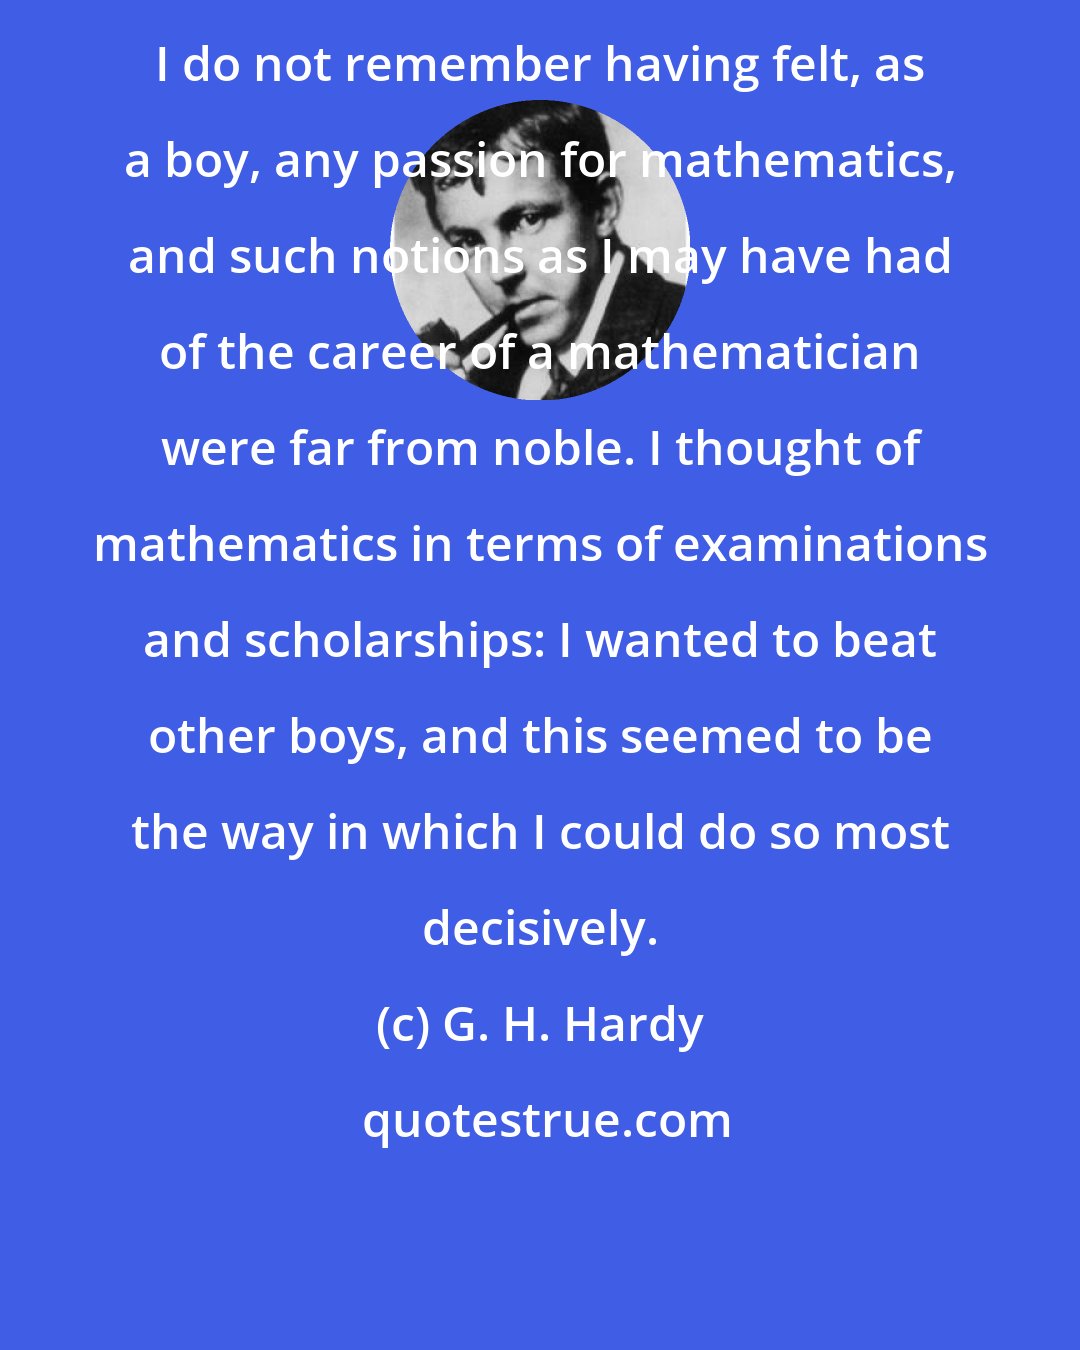 G. H. Hardy: I do not remember having felt, as a boy, any passion for mathematics, and such notions as I may have had of the career of a mathematician were far from noble. I thought of mathematics in terms of examinations and scholarships: I wanted to beat other boys, and this seemed to be the way in which I could do so most decisively.